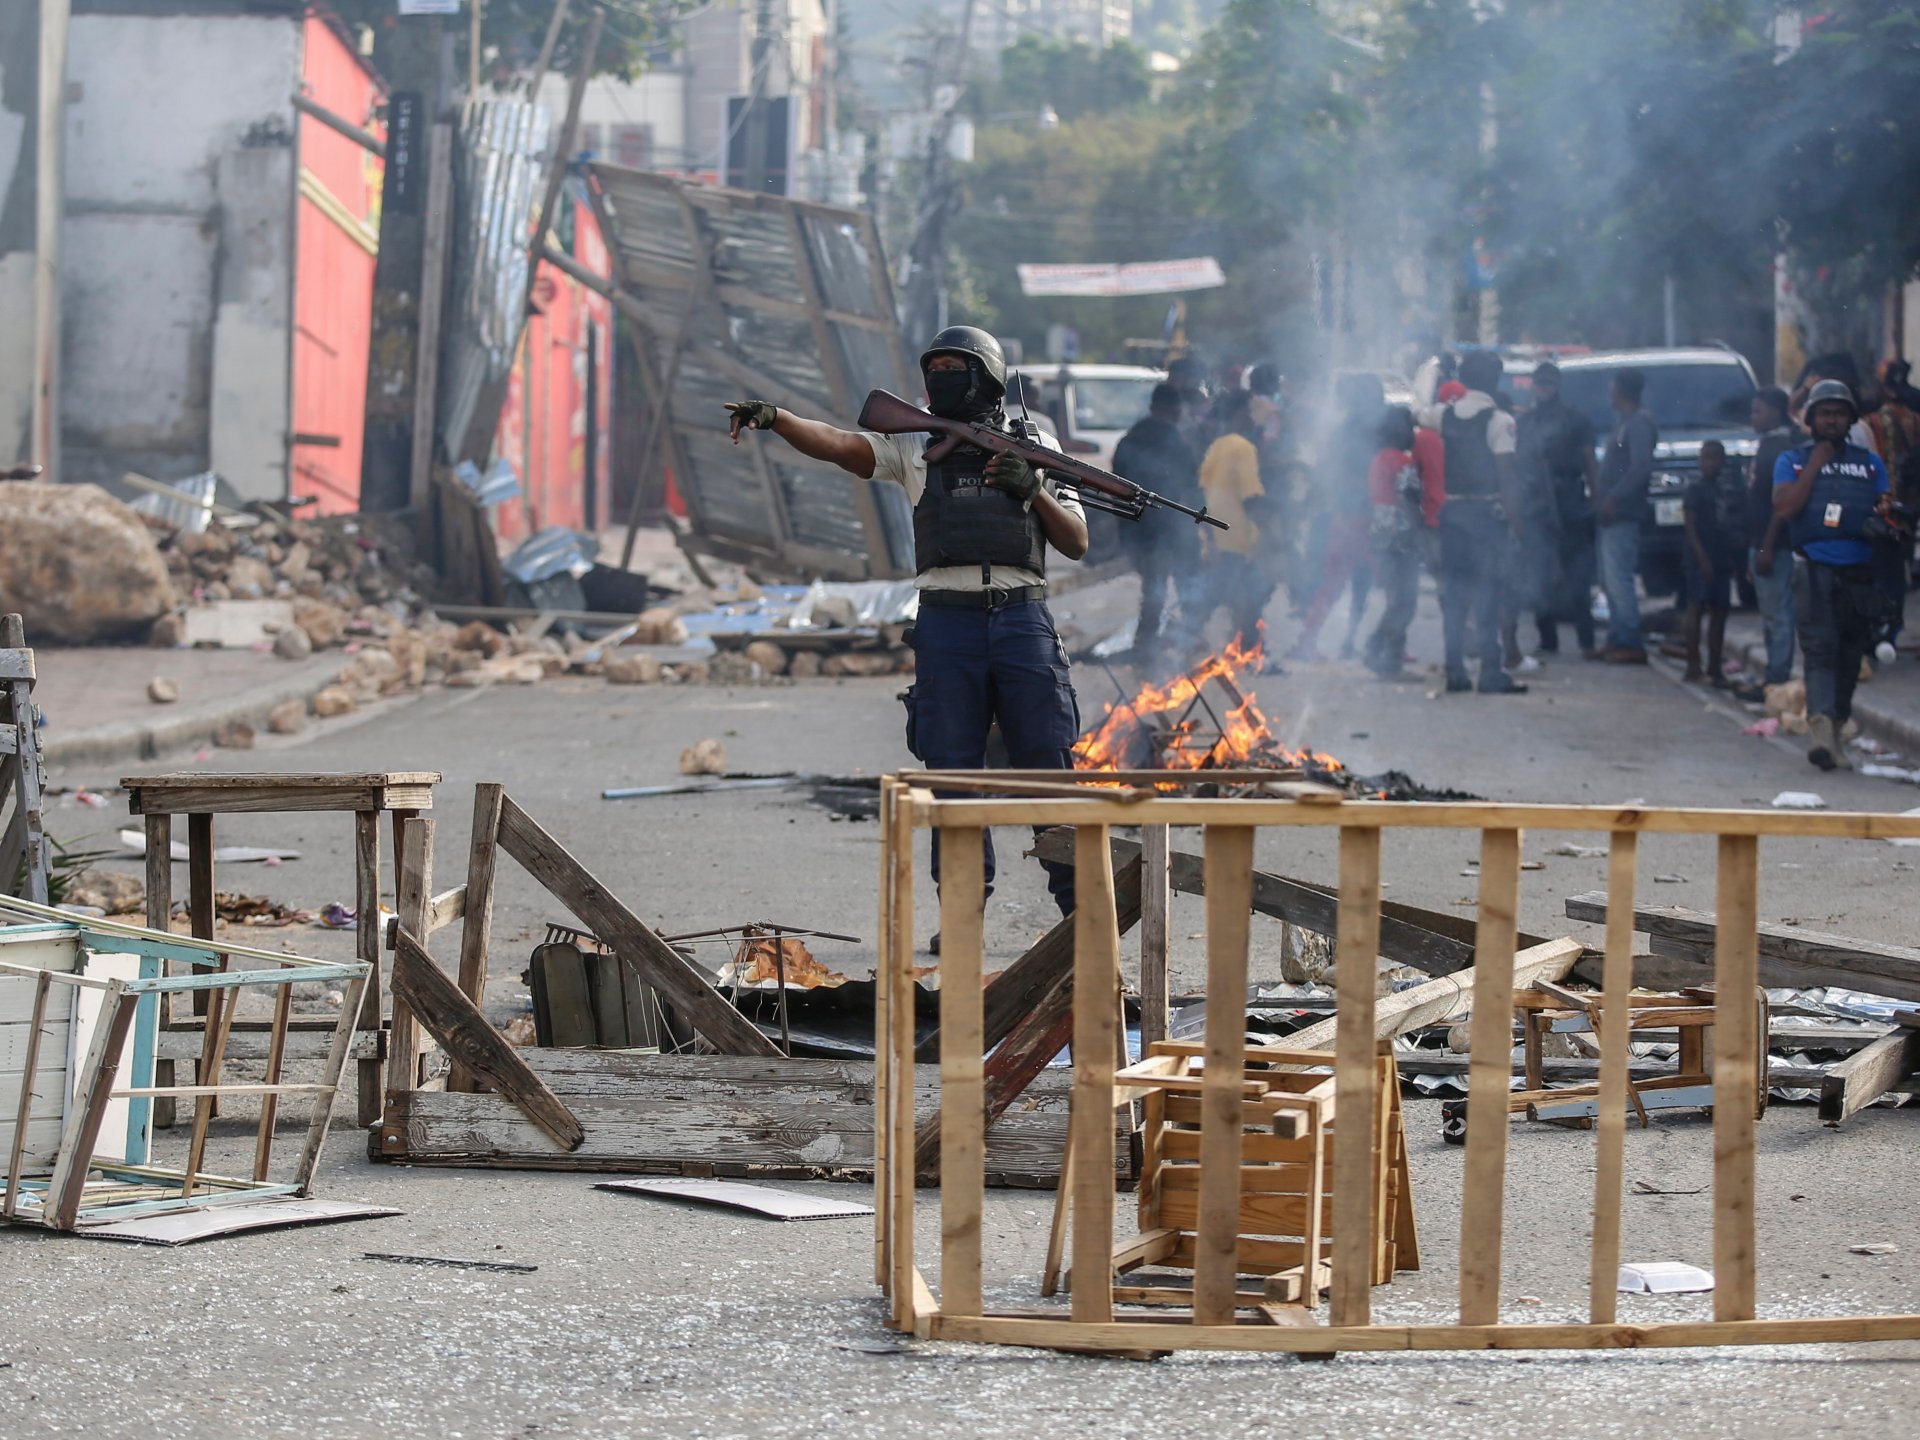 Gunfire paralyses Haiti as gang leader pushes for PM’s removal | News